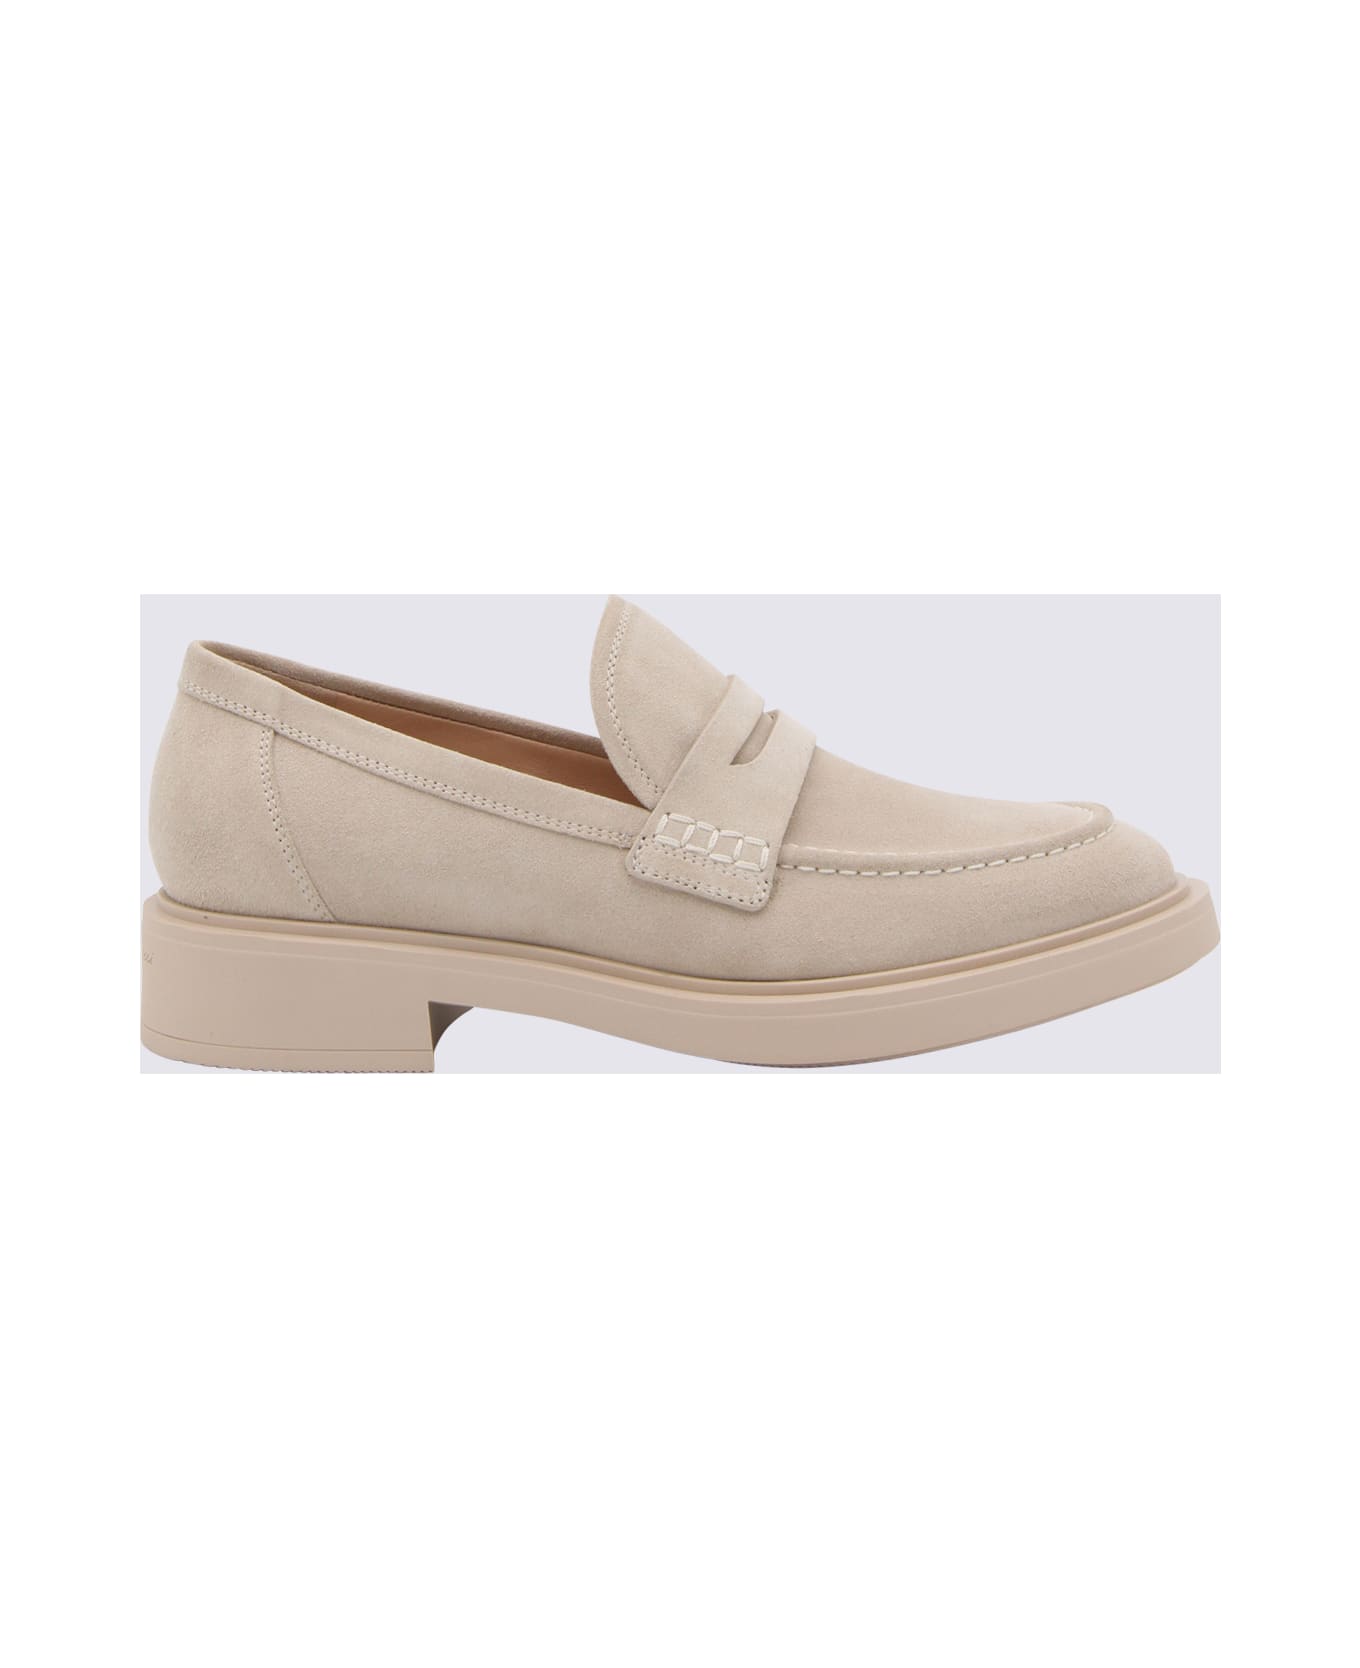 Gianvito Rossi Mousse Suede Loafers - Beige